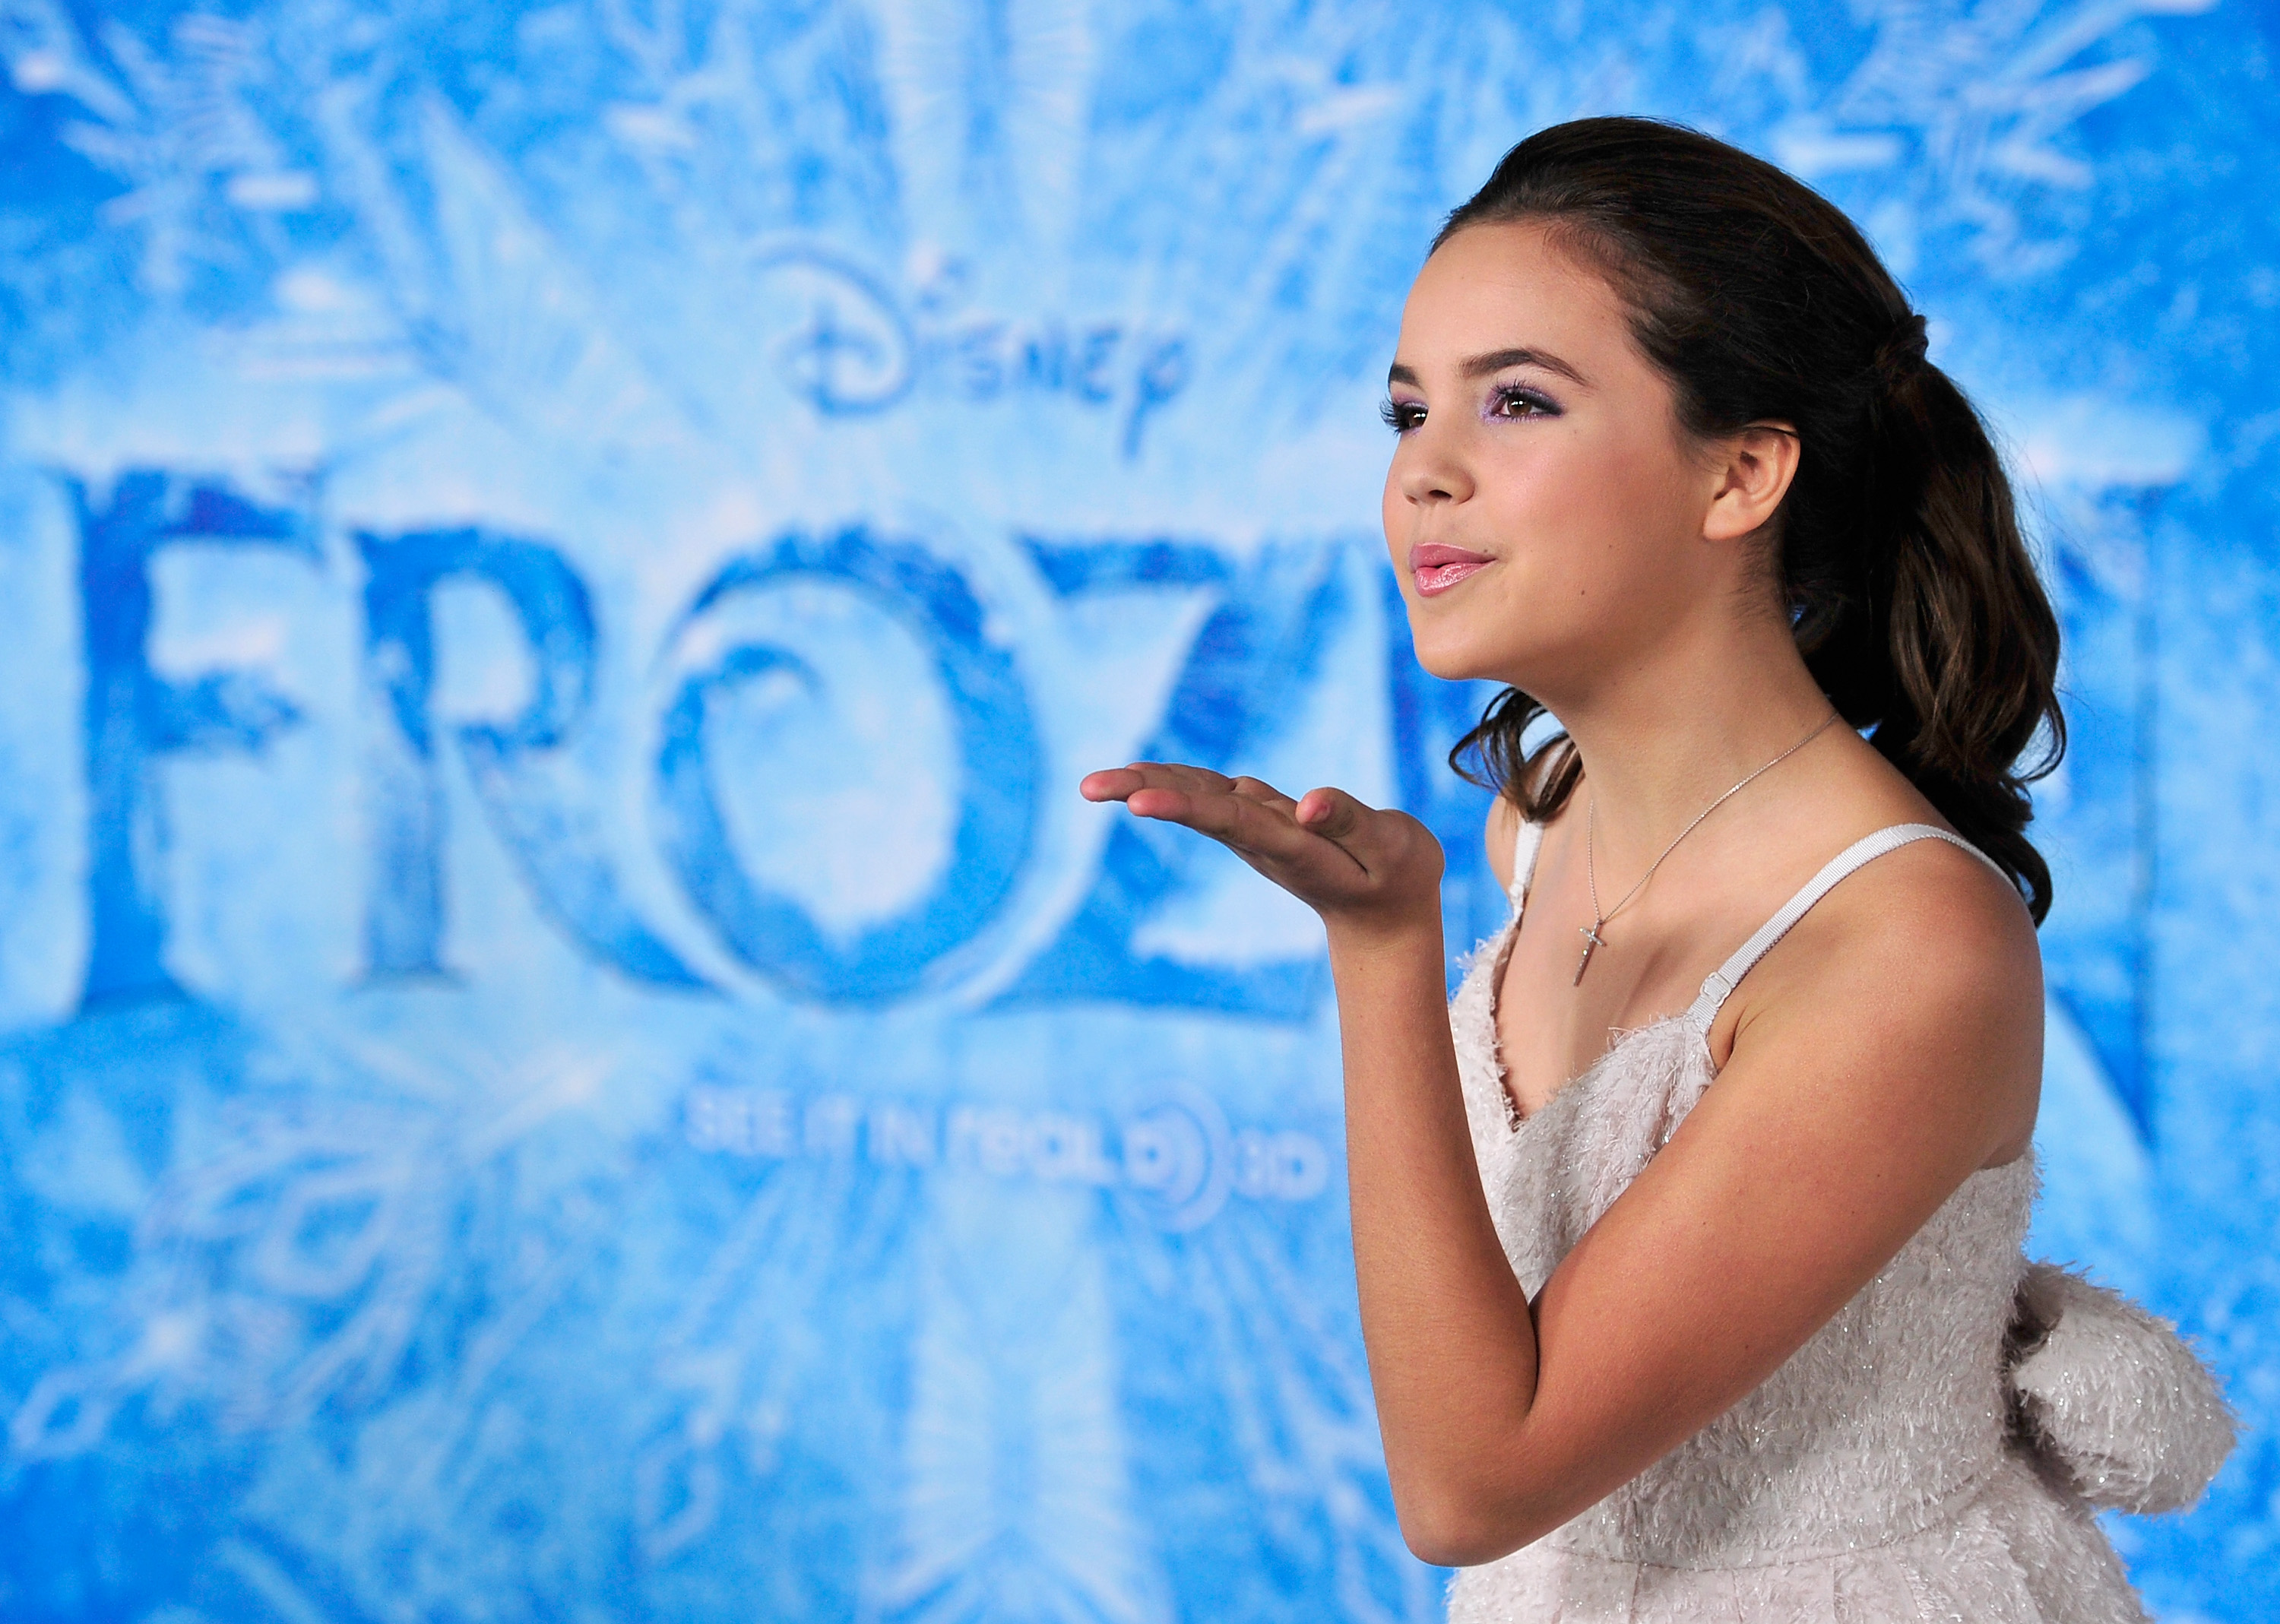 Frozen,' Marvel flicks drive another record year for Disney | Fortune